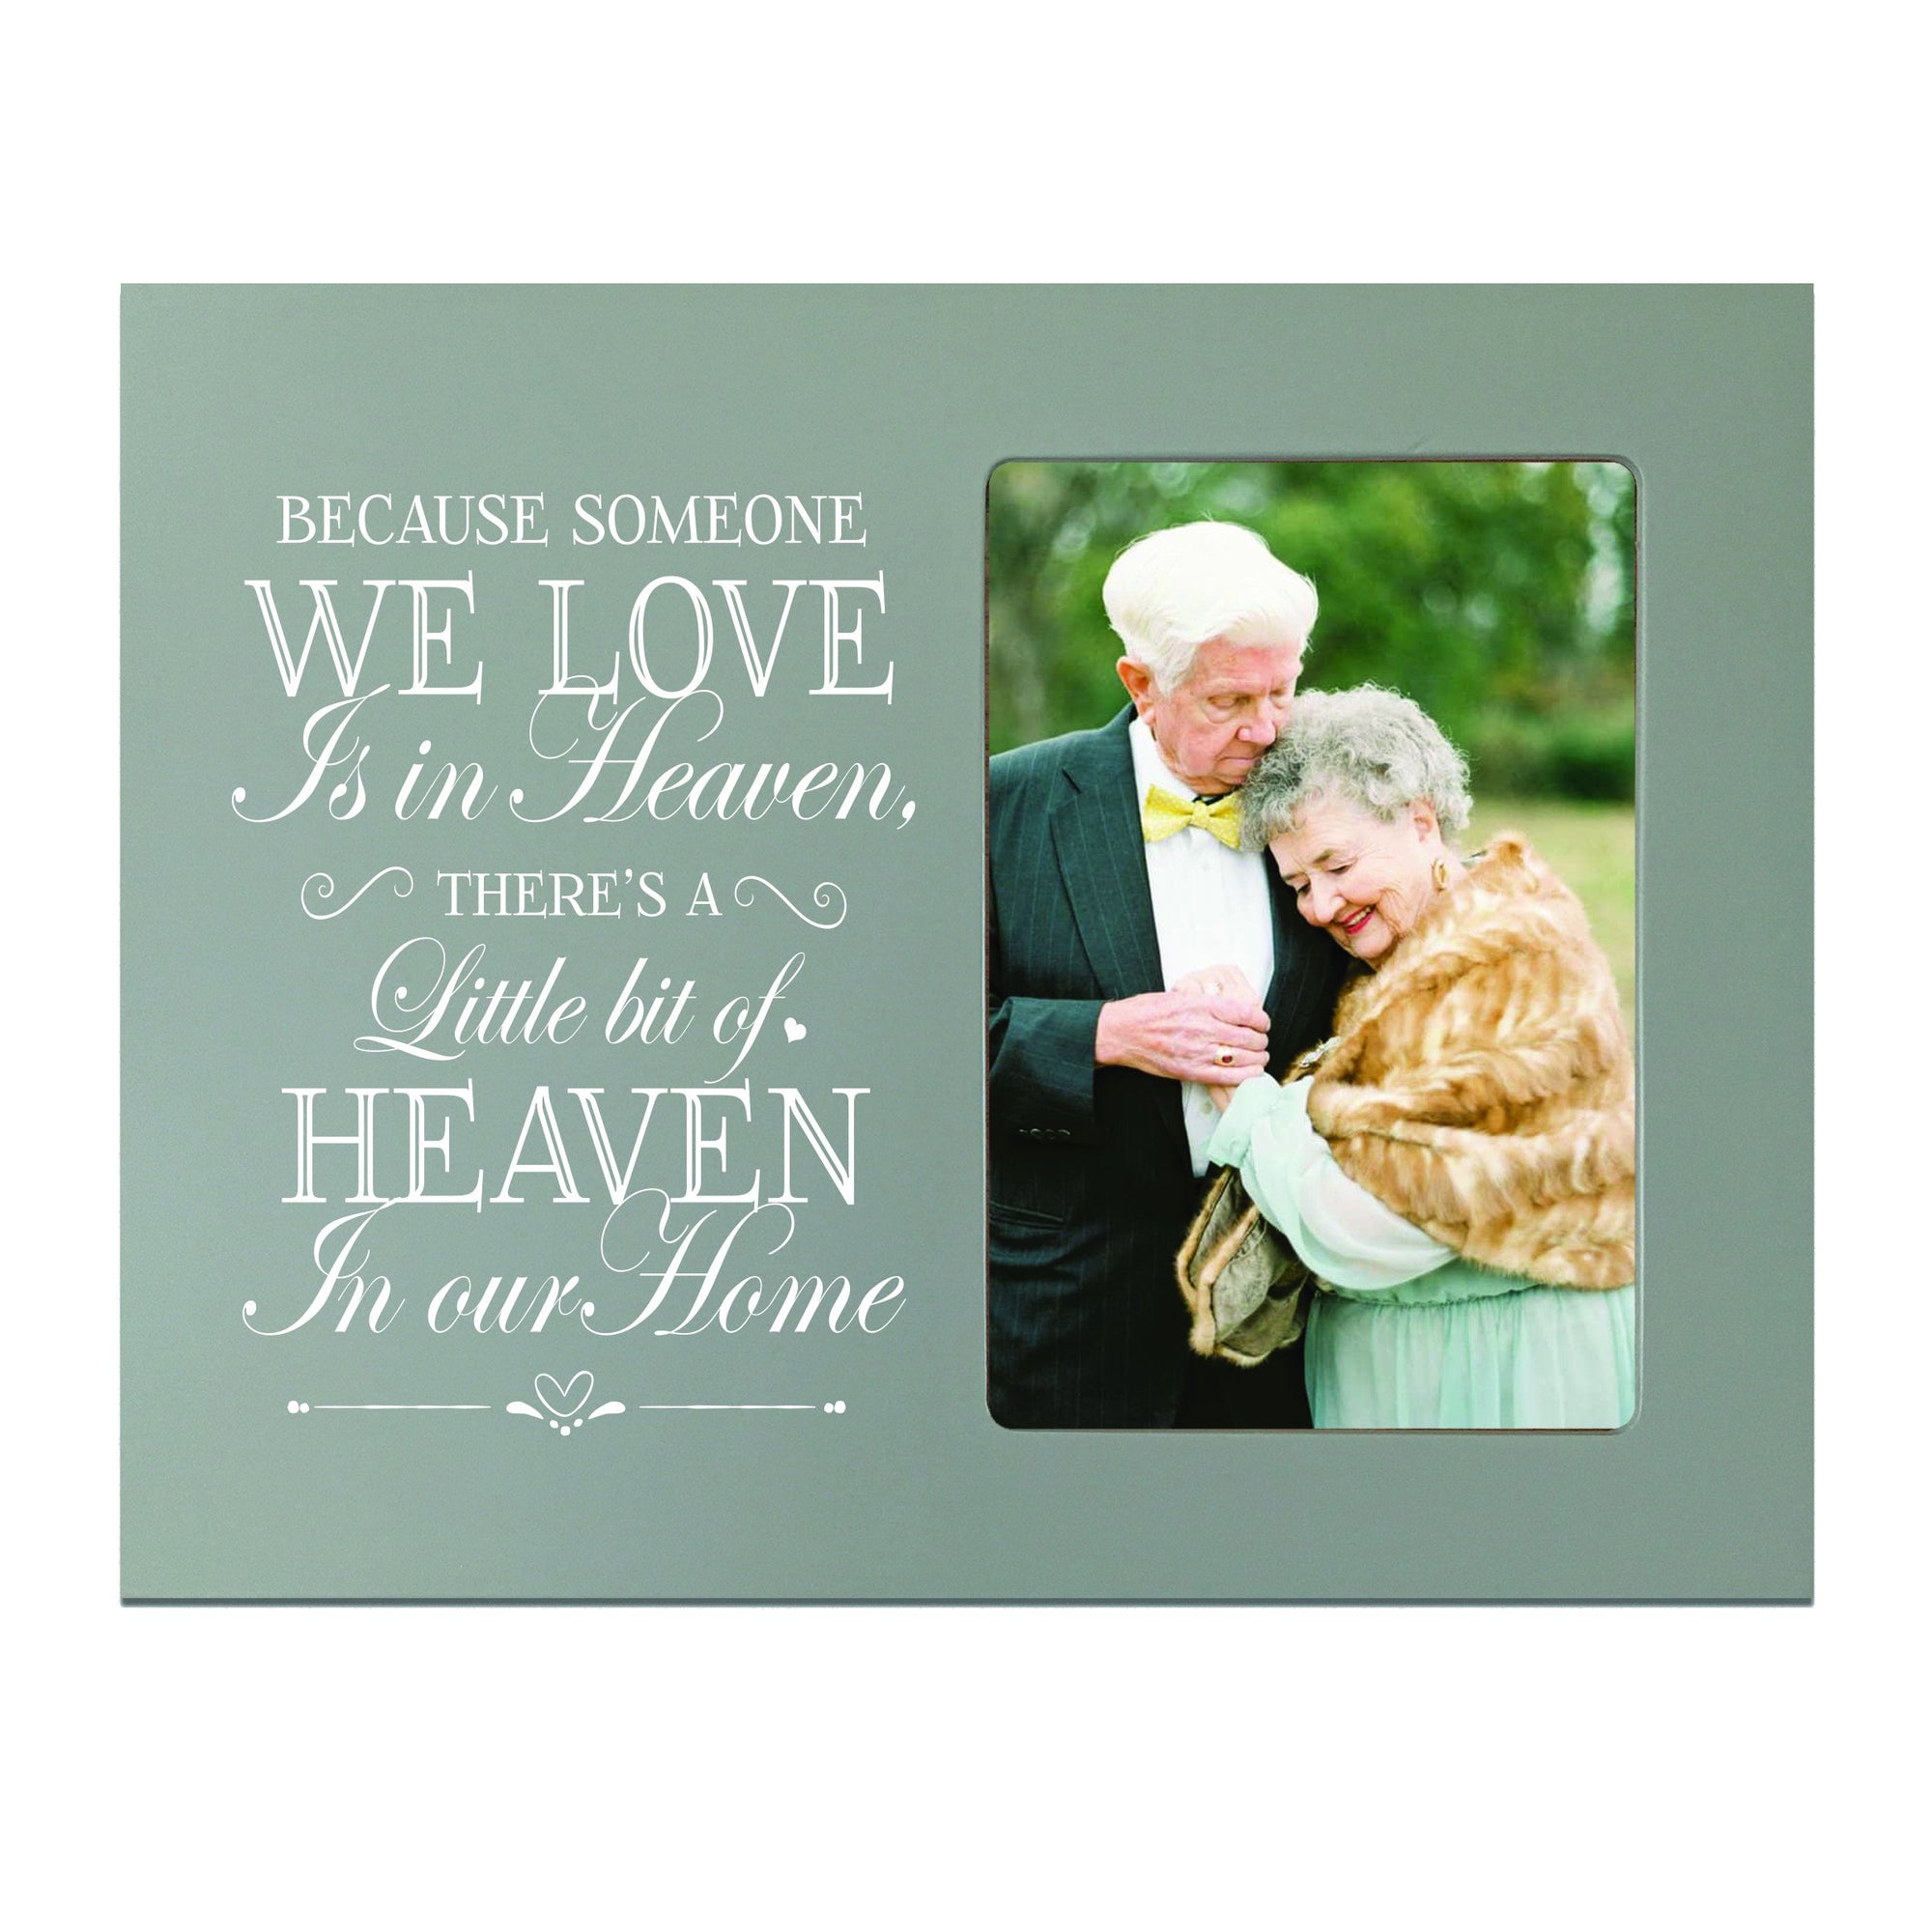 LifeSong Milestones Memorial Picture Frame - Bereavement Sympathy Gift for Loss of Loved One 8” x 10” Photo Frame Holds 4” x 6” Photo